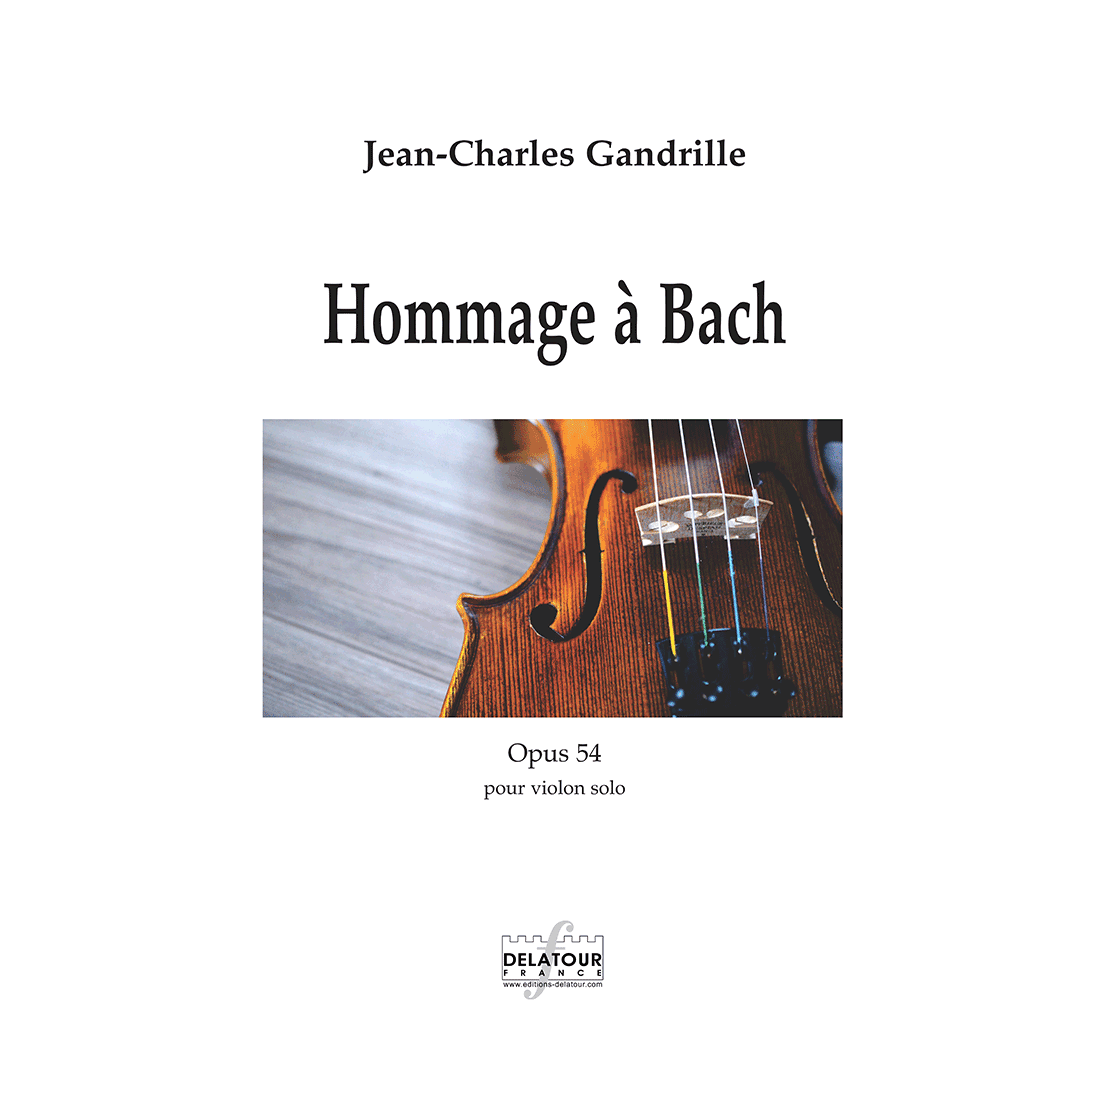 Hommage à Bach for violin solo